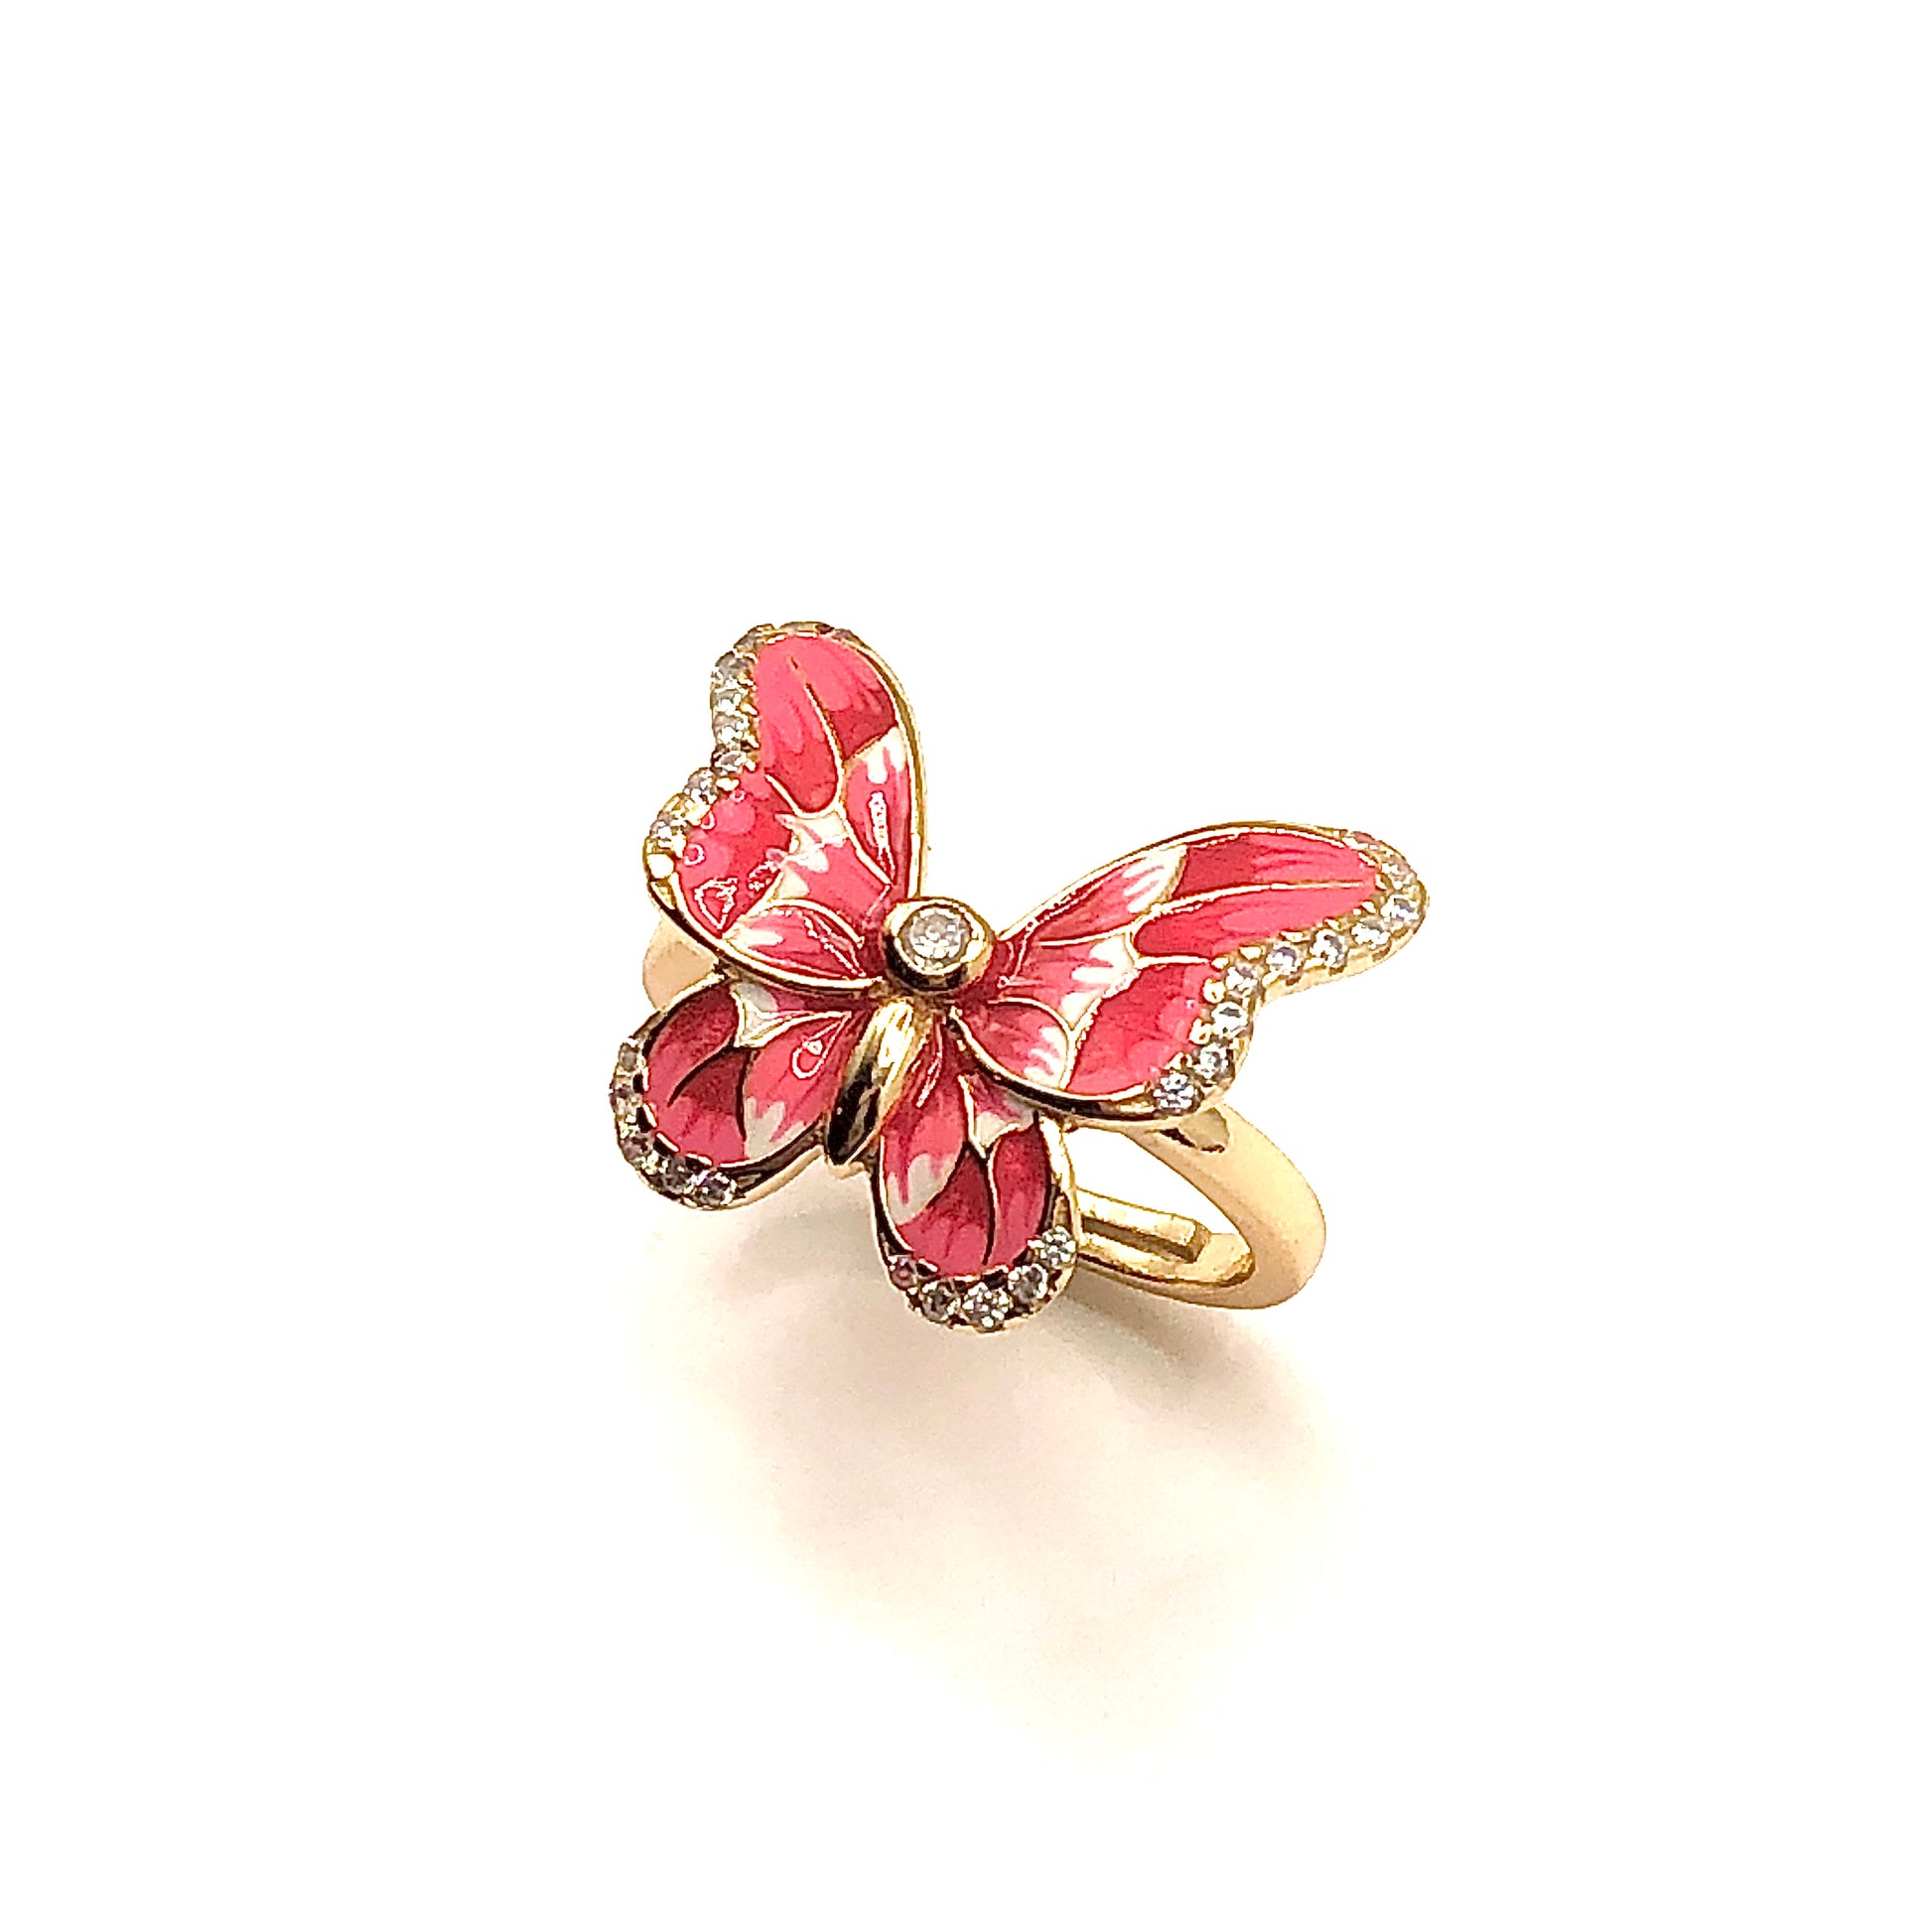 Ring - Womens Beautiful Gold Pink Butterfly Ring - Sterling Silver Zirconia Stone Ring - Cocktail Ring - Statement Ring